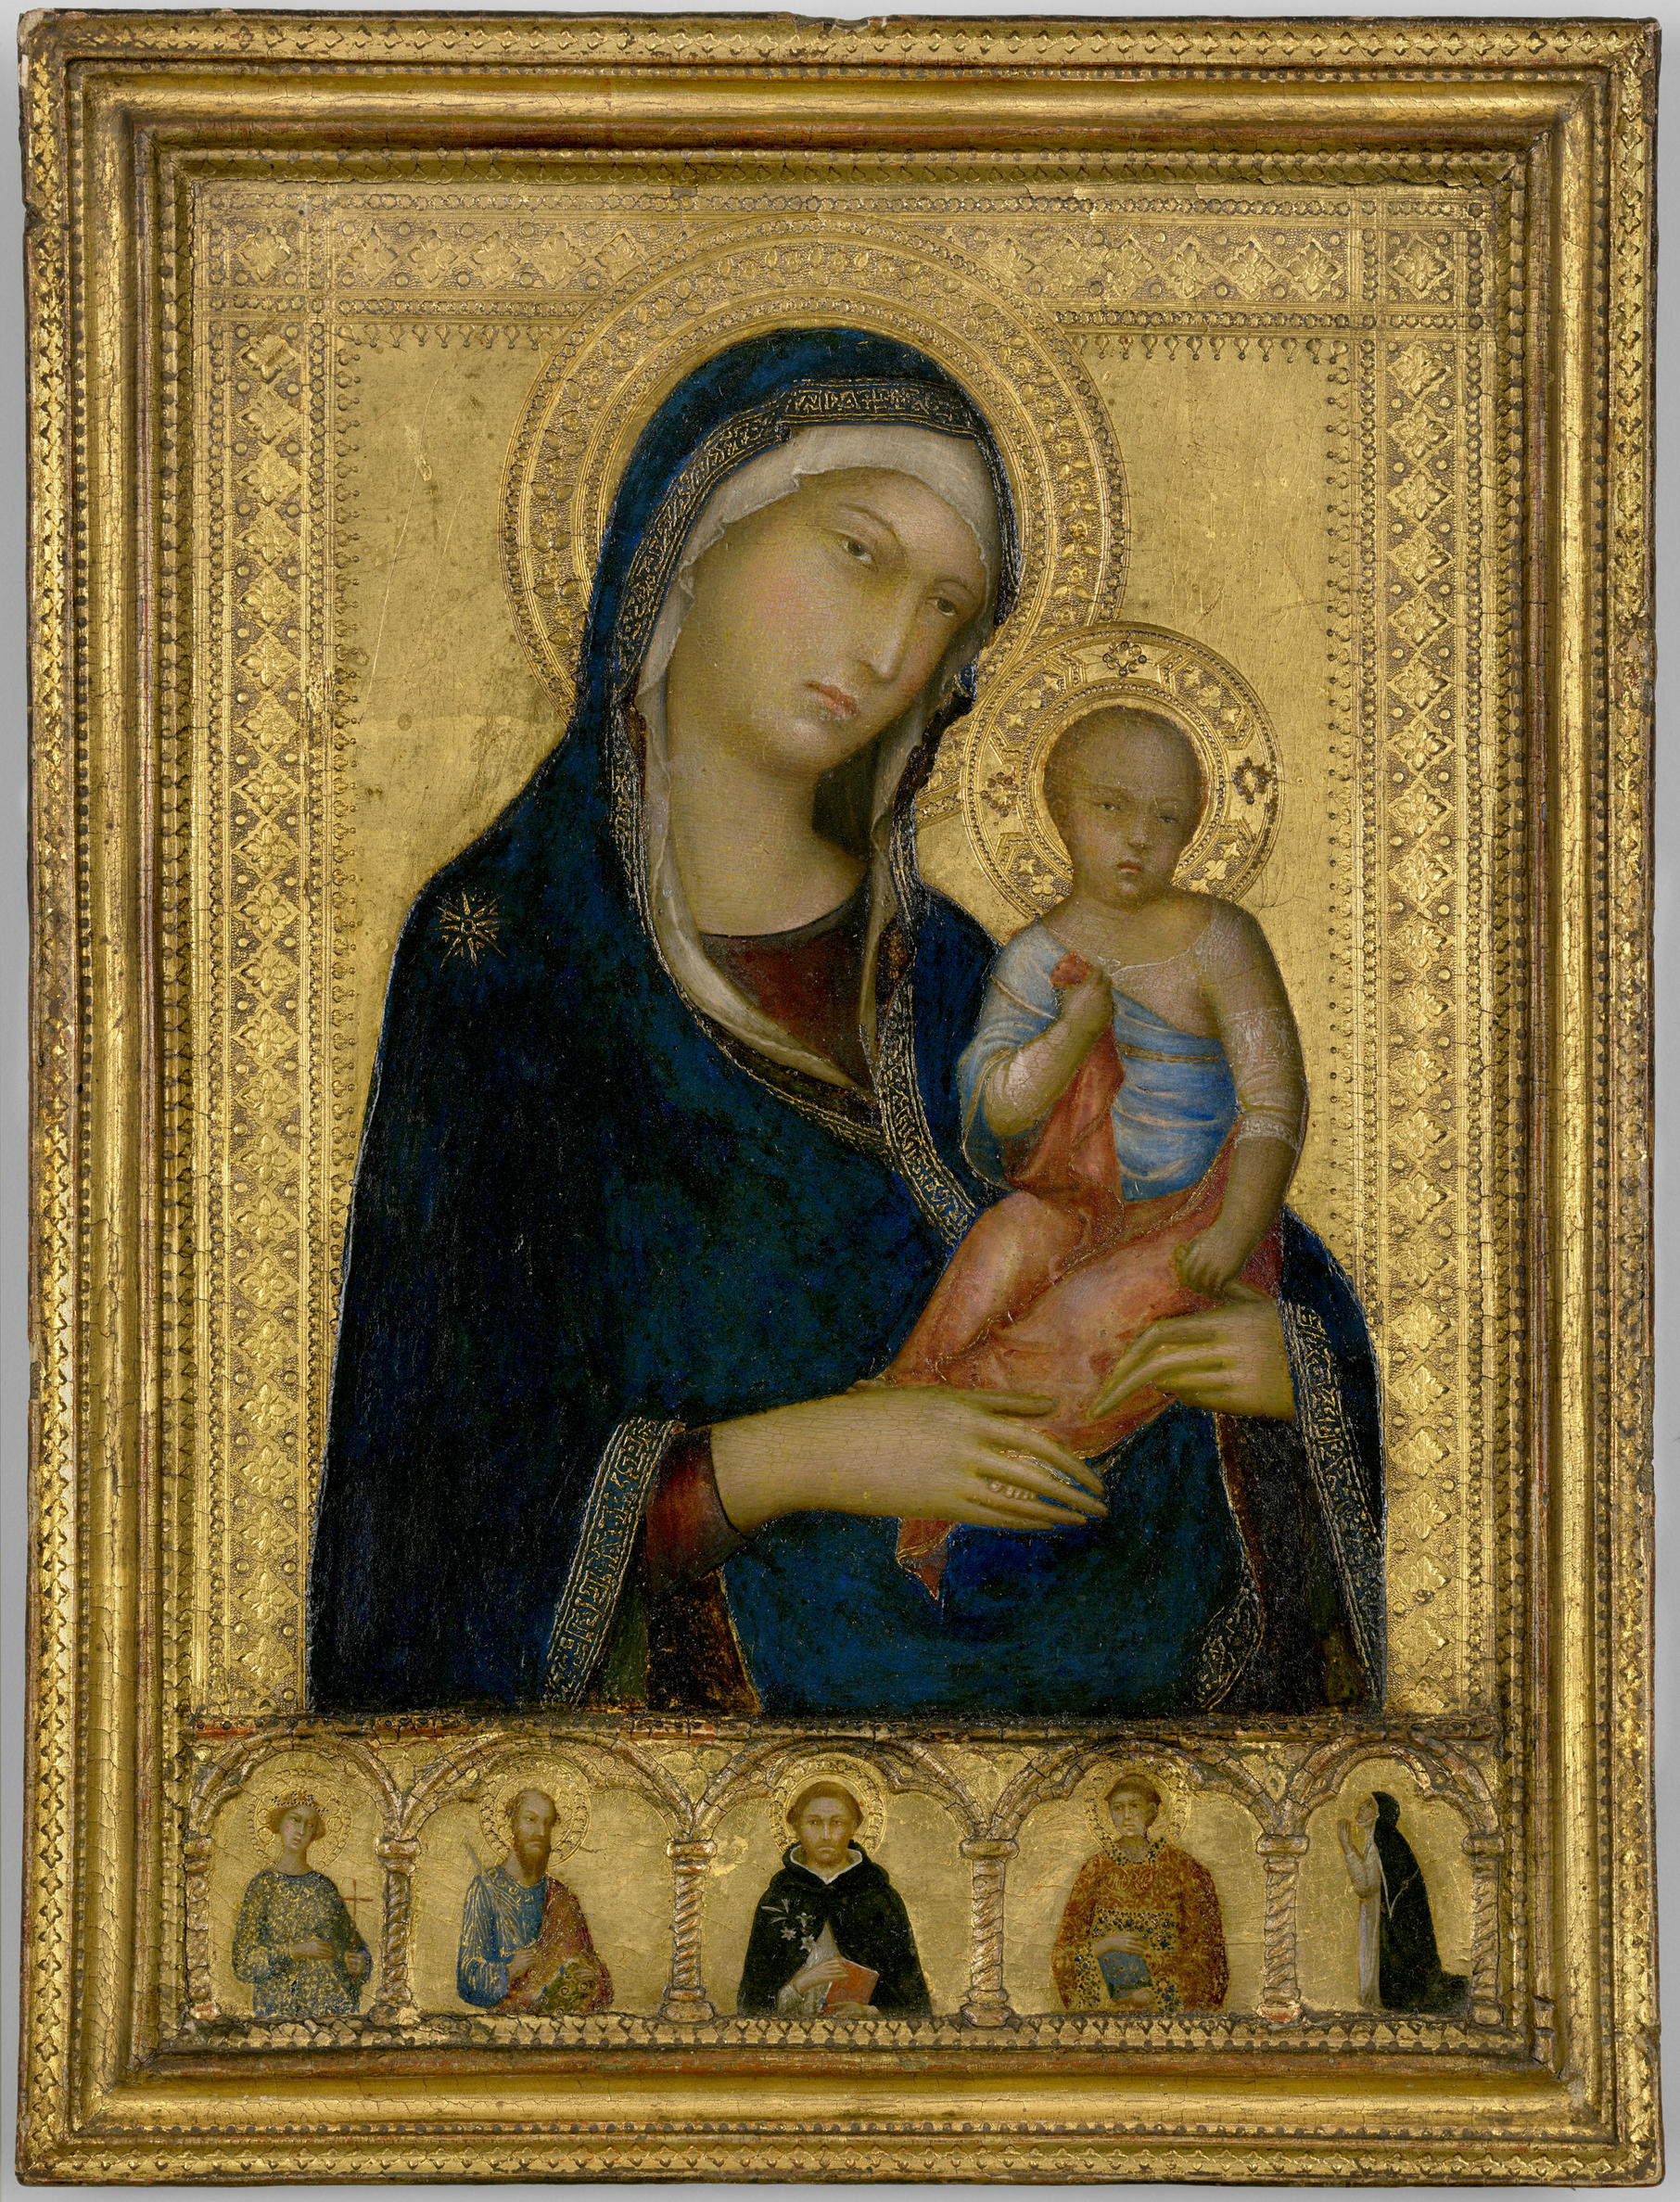 Simone Martini (c. 1284-1344, Italy), Virgin and Child with Saints, about 1325.   Isabella Stewart Gardner Museum, Boston.